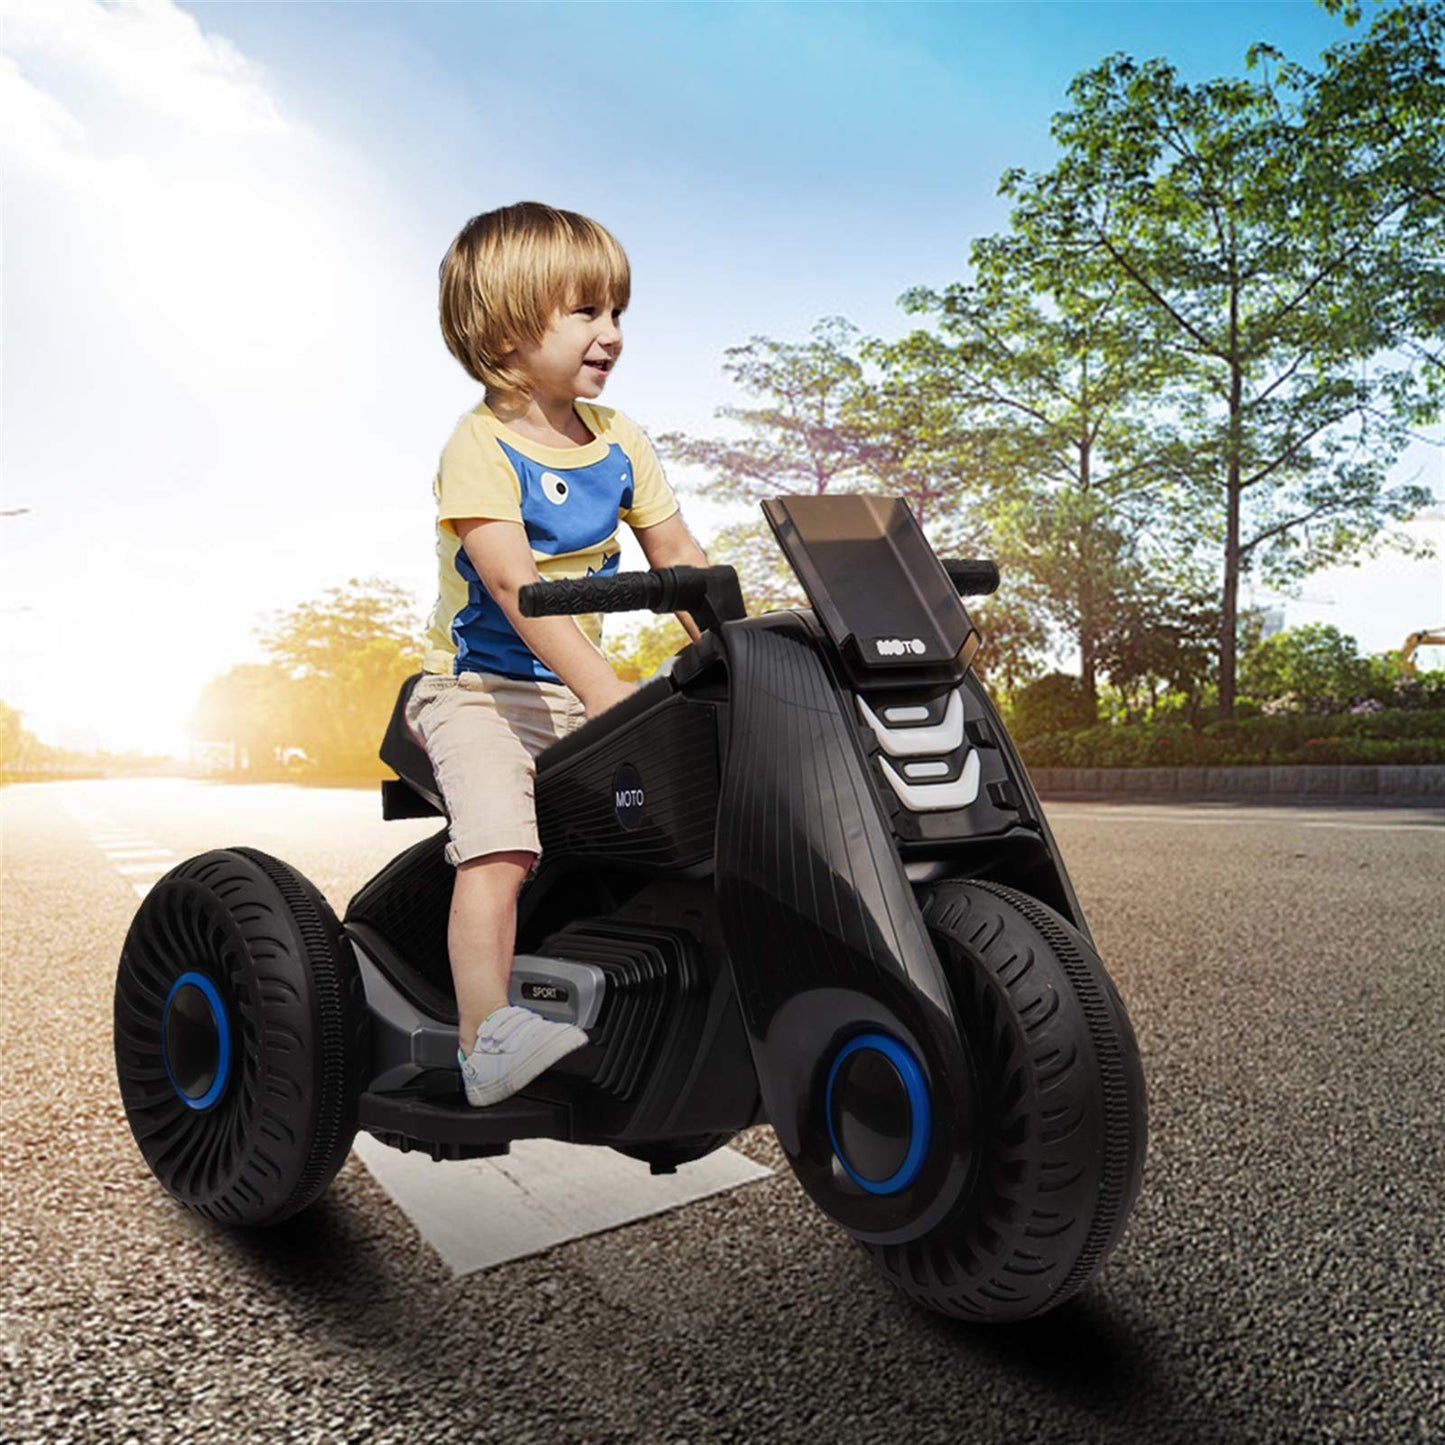 AceX Kids Motorcycle, Kids Ride on Motorbike Toys 3 Wheels Electric Motorcycle - V6 Battery-Powered Dual-Drive Riding Toy w Music Horn & Headlights for Boys and Girls 2-8 Years Old (Black)